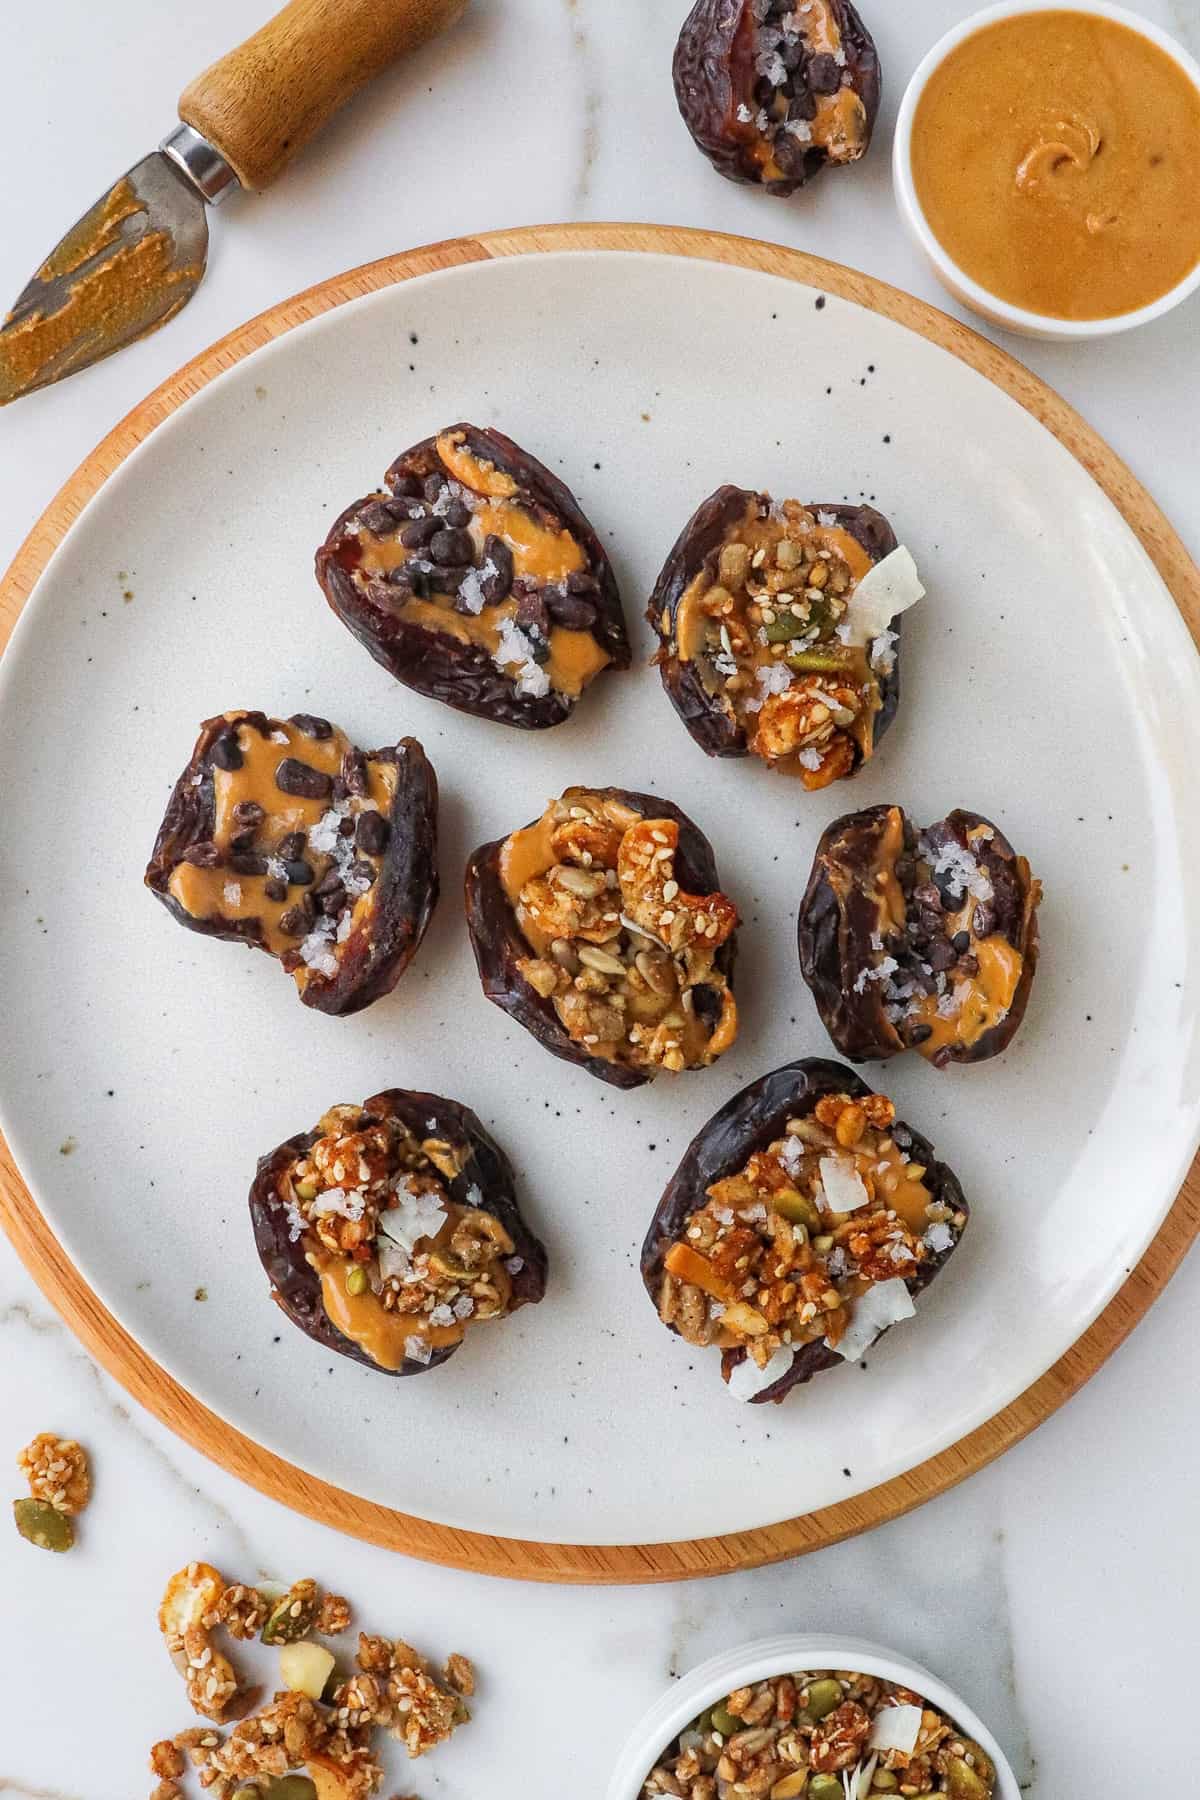 Peanut butter stuffed dates with granola and cacao nibs on a plate.